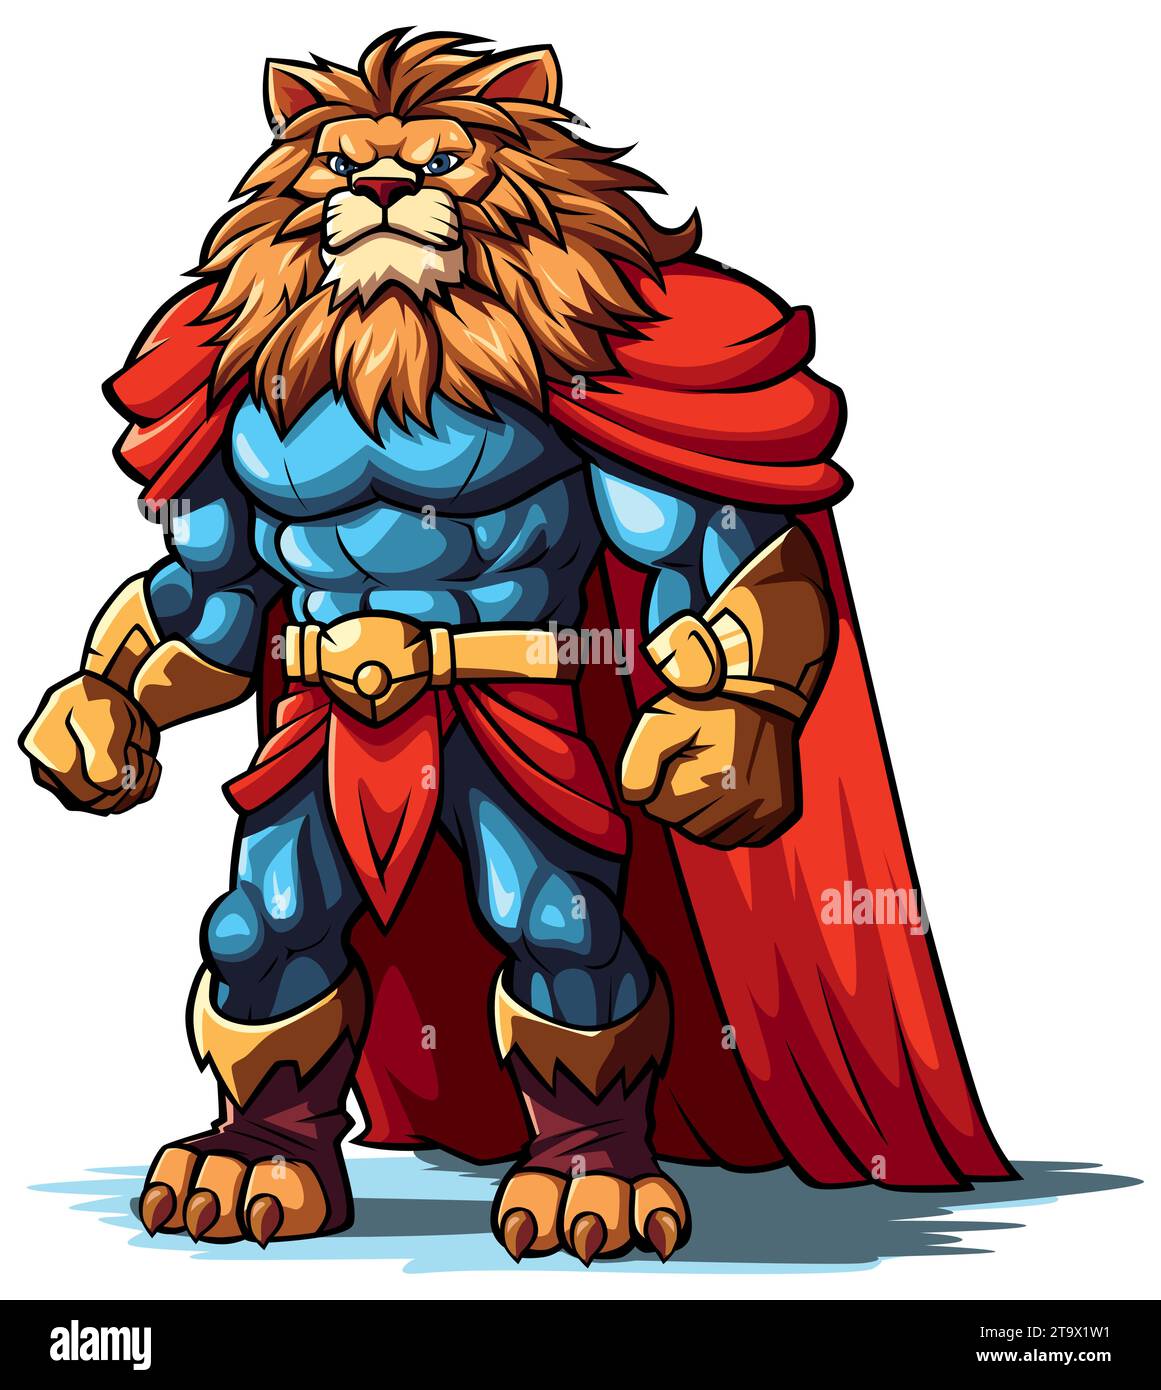 Anthropomorphic lion character dressed in a superhero costume, with a blue suit, red cape, and golden accents. Stock Vector